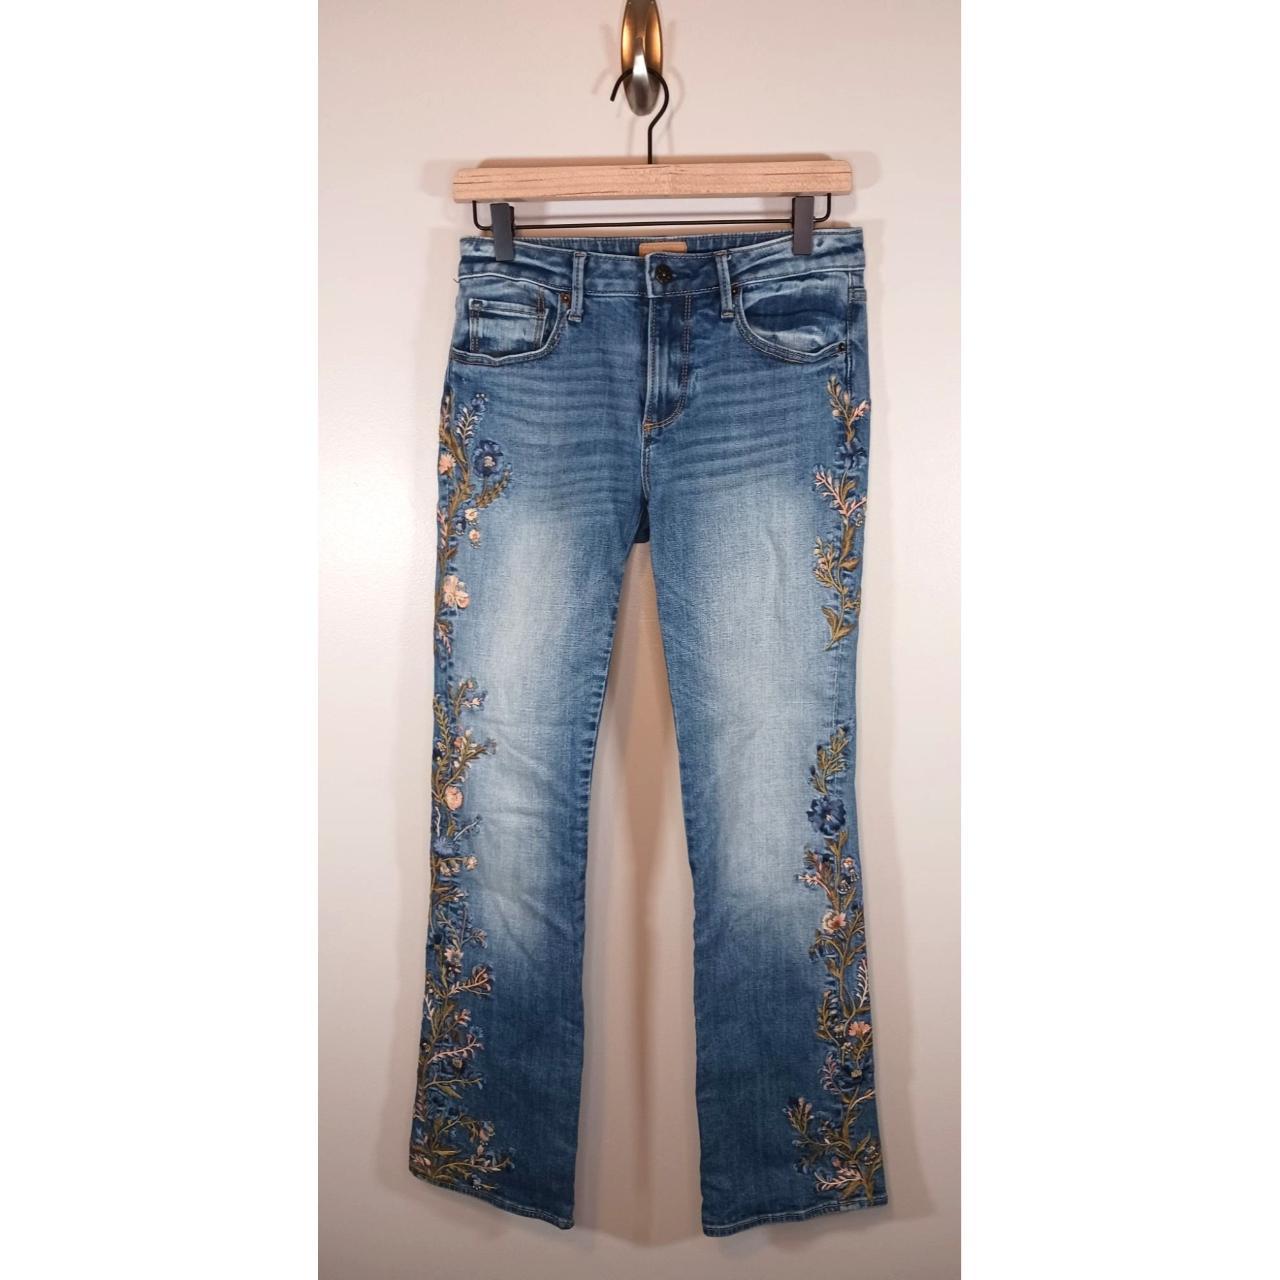 Driftwood Kelly Floral Embroidered Bootcut Flare... - Depop